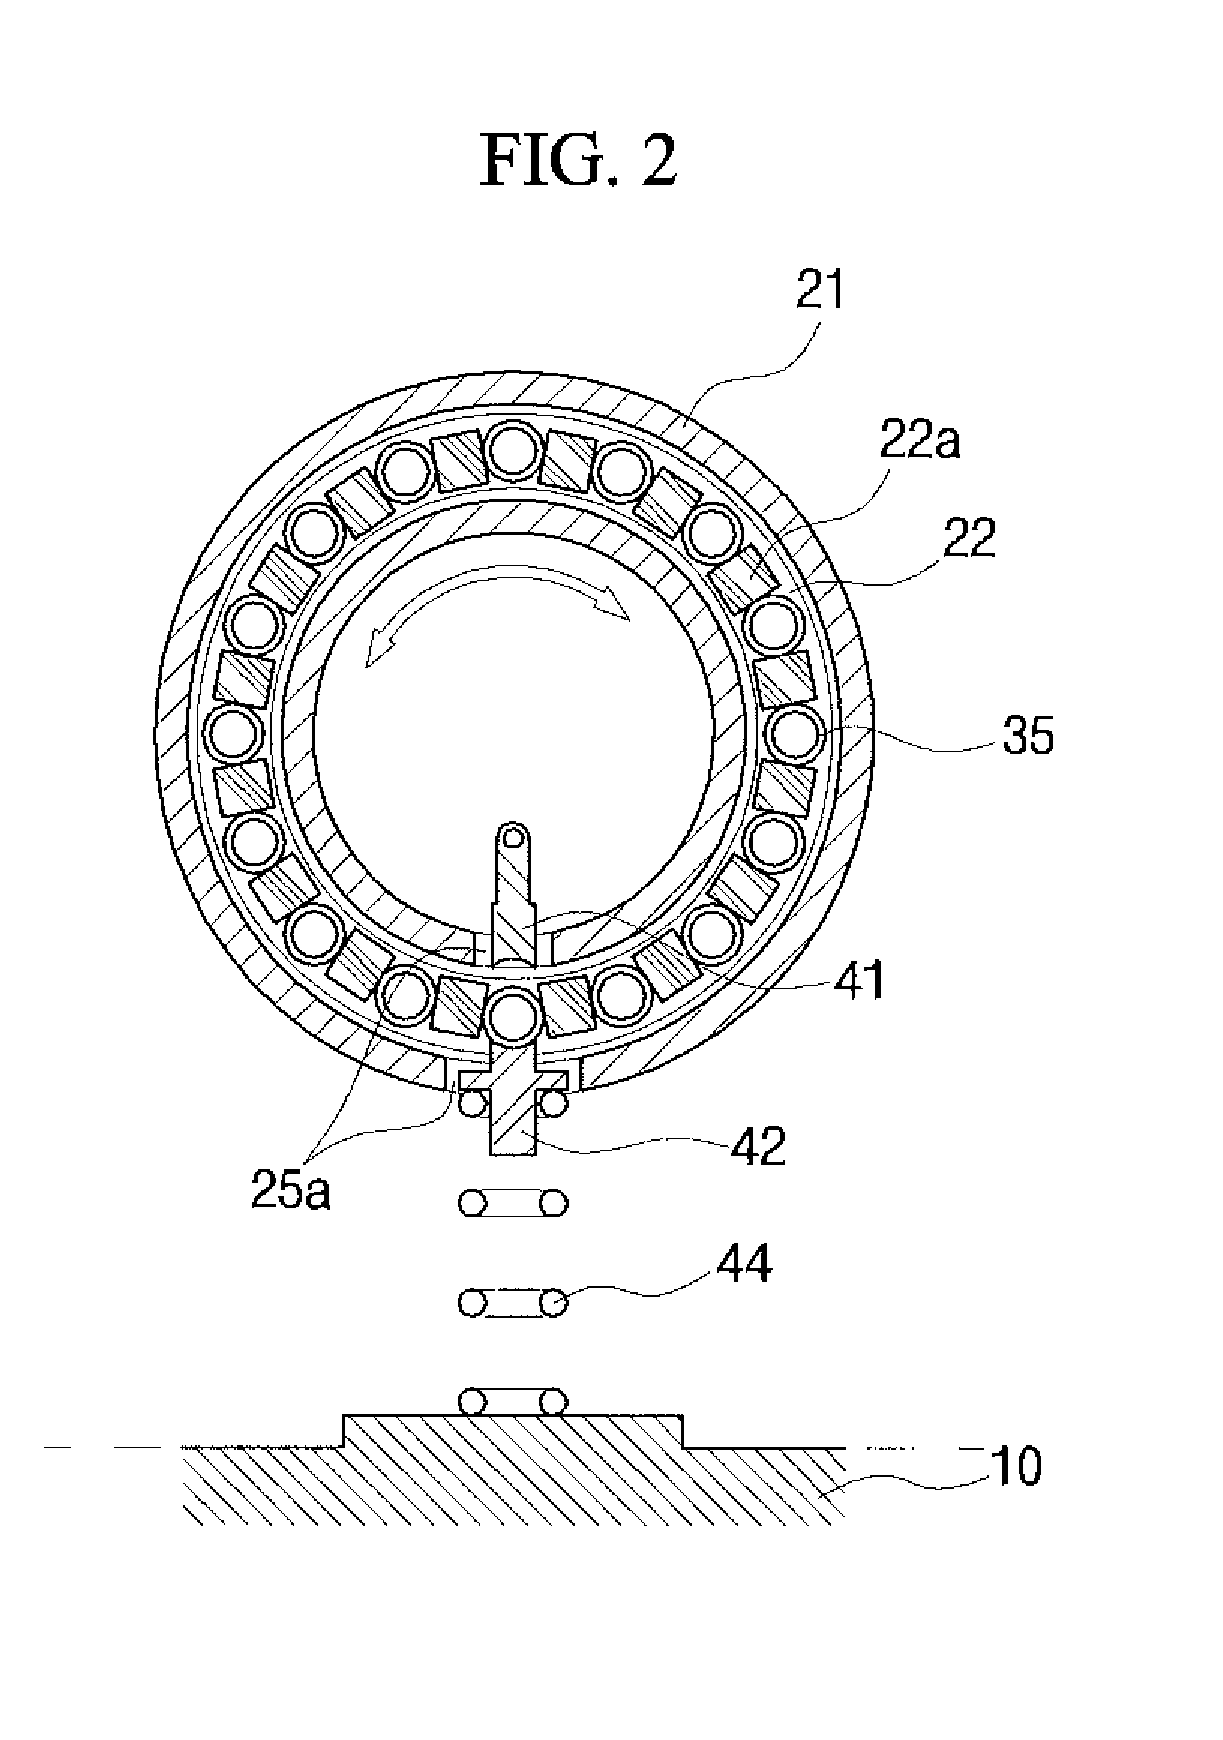 Injector for hair implant with automatic follicle supply function